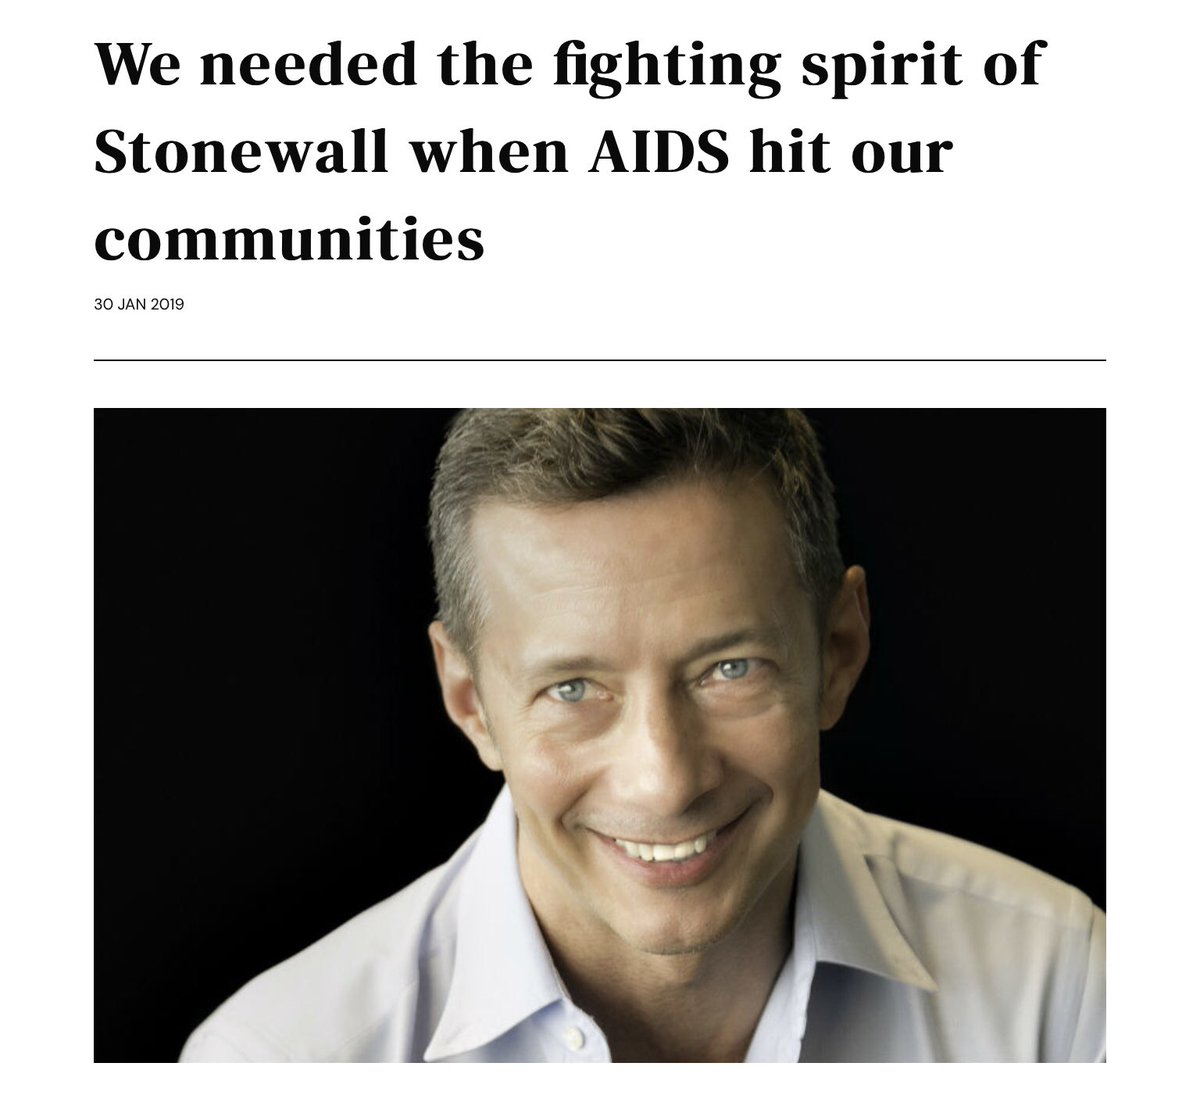 We see this thinking rearing its head again now, with support for LGBT rights being seen as ‘political’ and attacks on trans people being ramped up.We should not have to debate our right to exist.Don’t just get angry. Get organised. https://www.gaystarnews.com/article/matthew-hodson-stonewall/